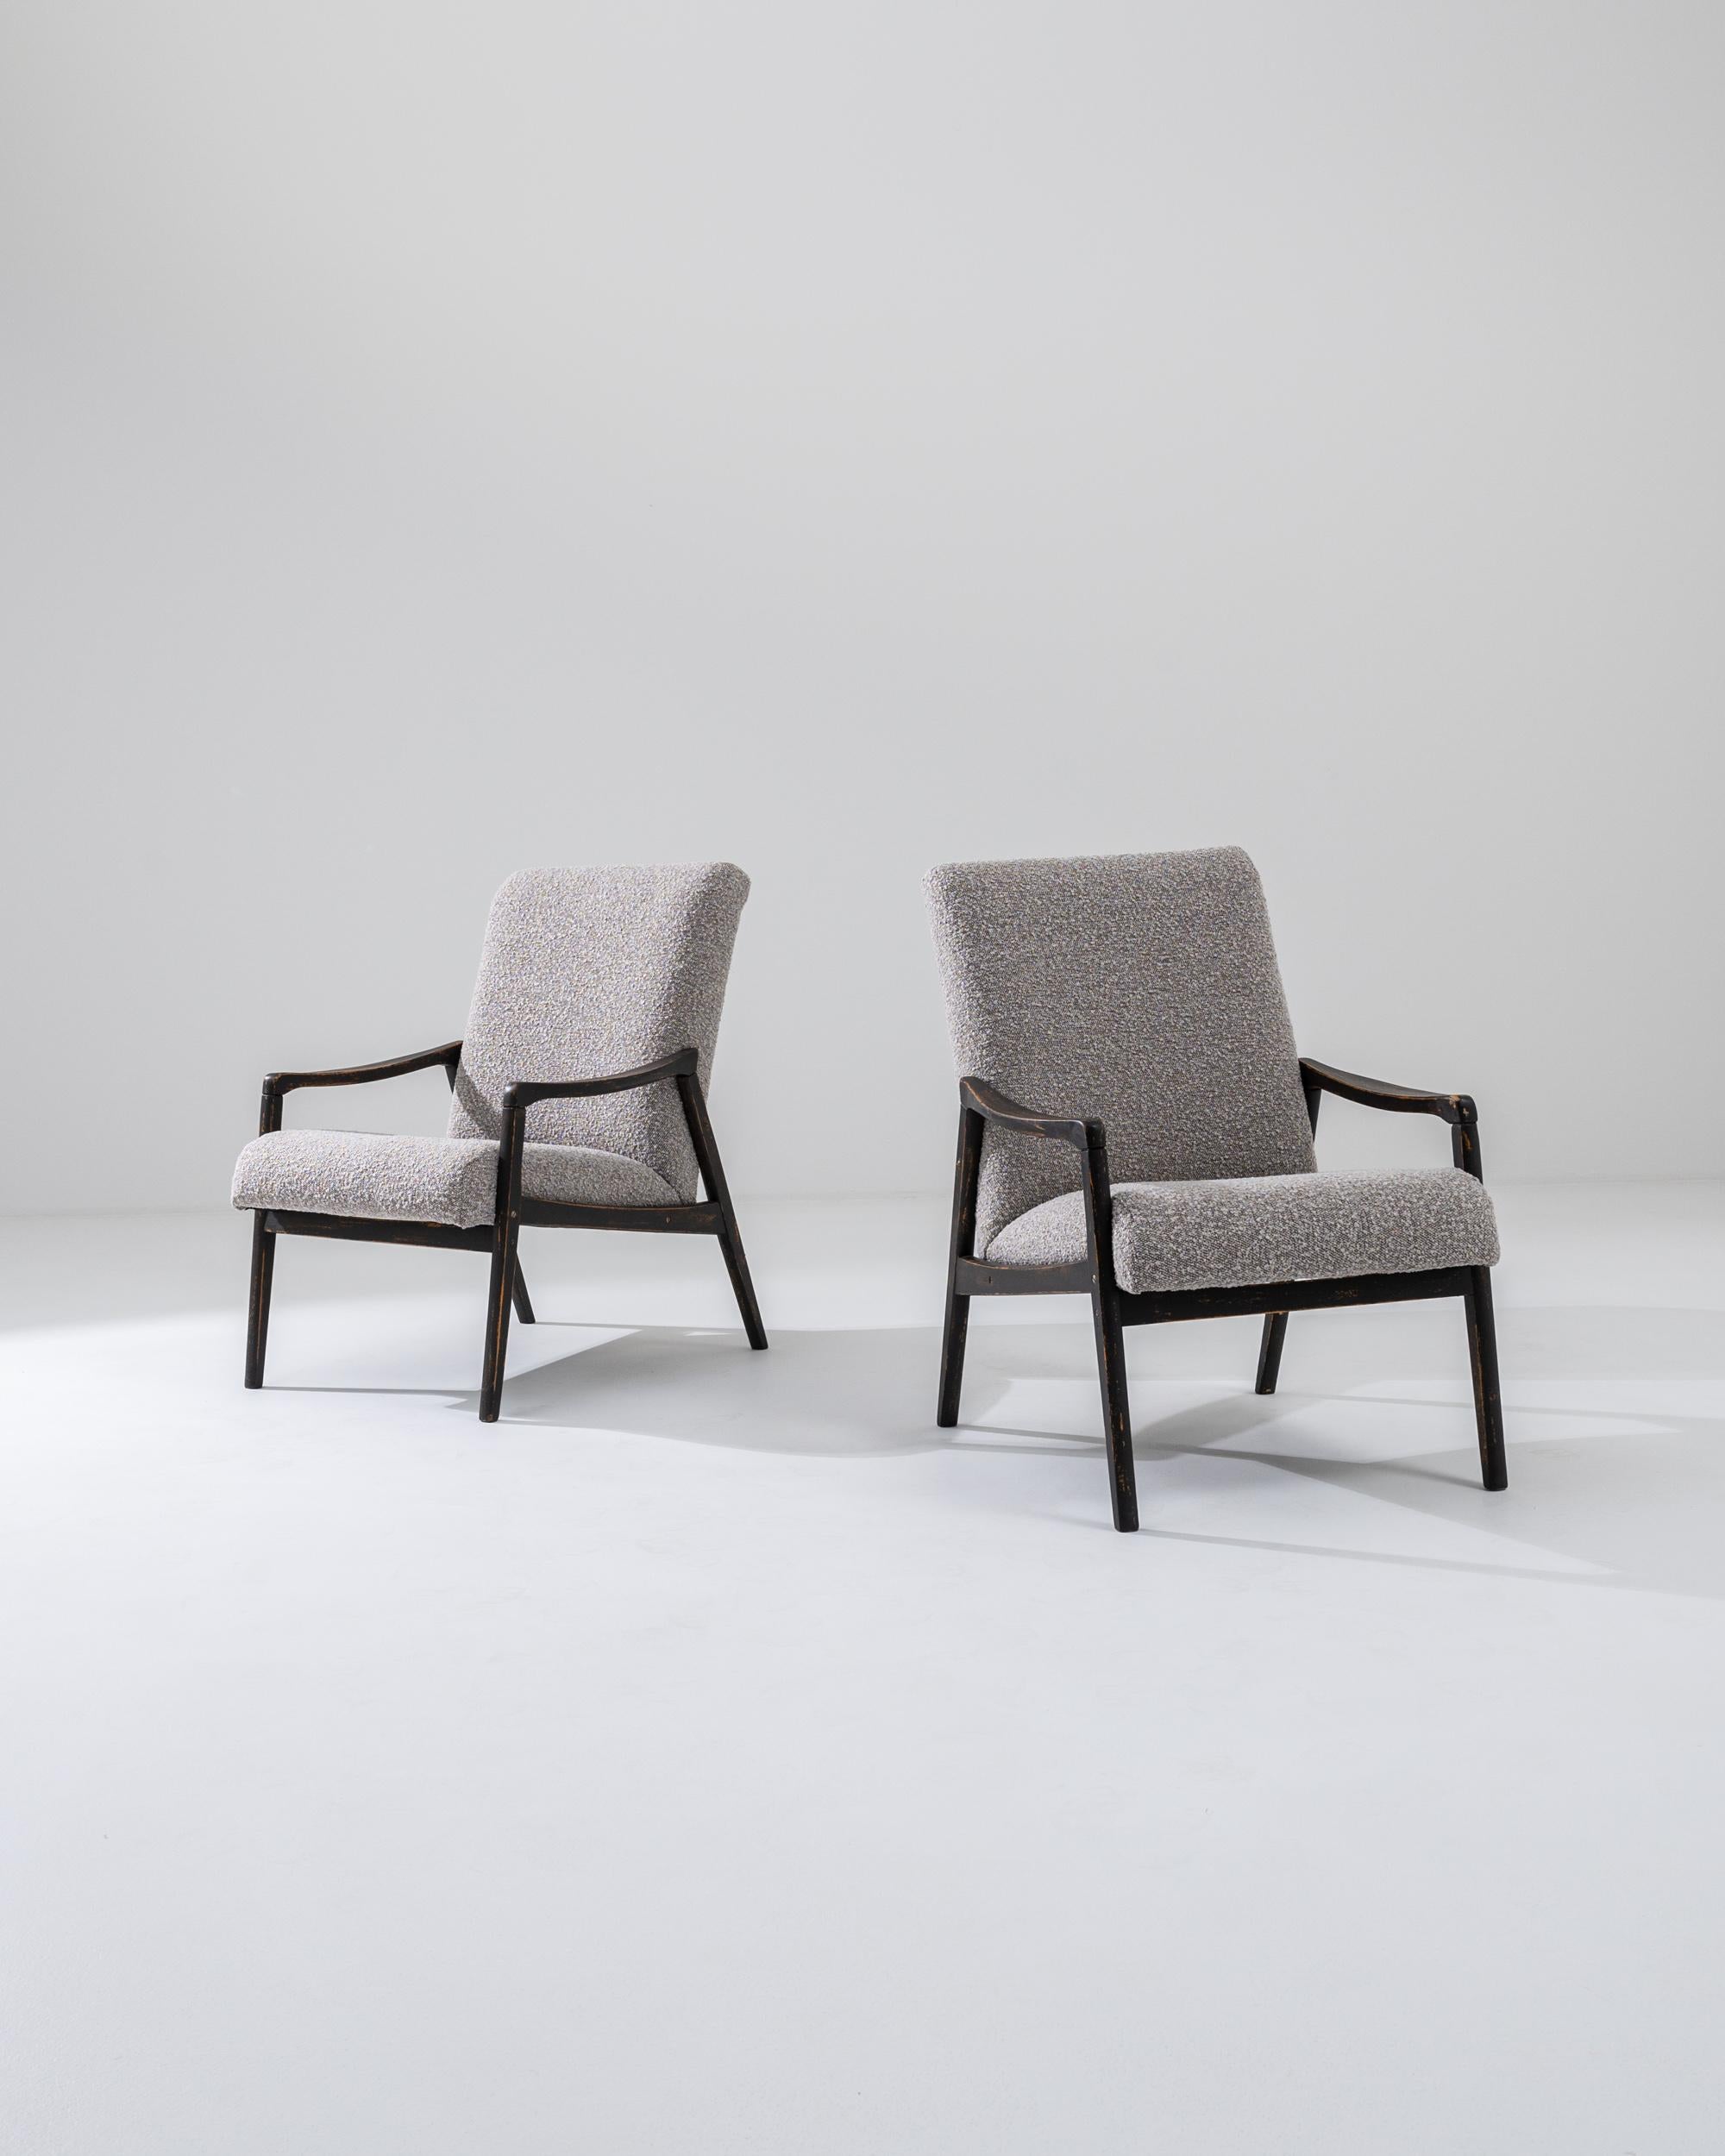 A pair of armchairs produced in the former Czechoslovakia, with the design attributed to Jiri Jiroutek. This 1960s design is re-upholstered in an updated taupe bouclé upholstery; the neutral tone was chosen to compliment the polished patina of the